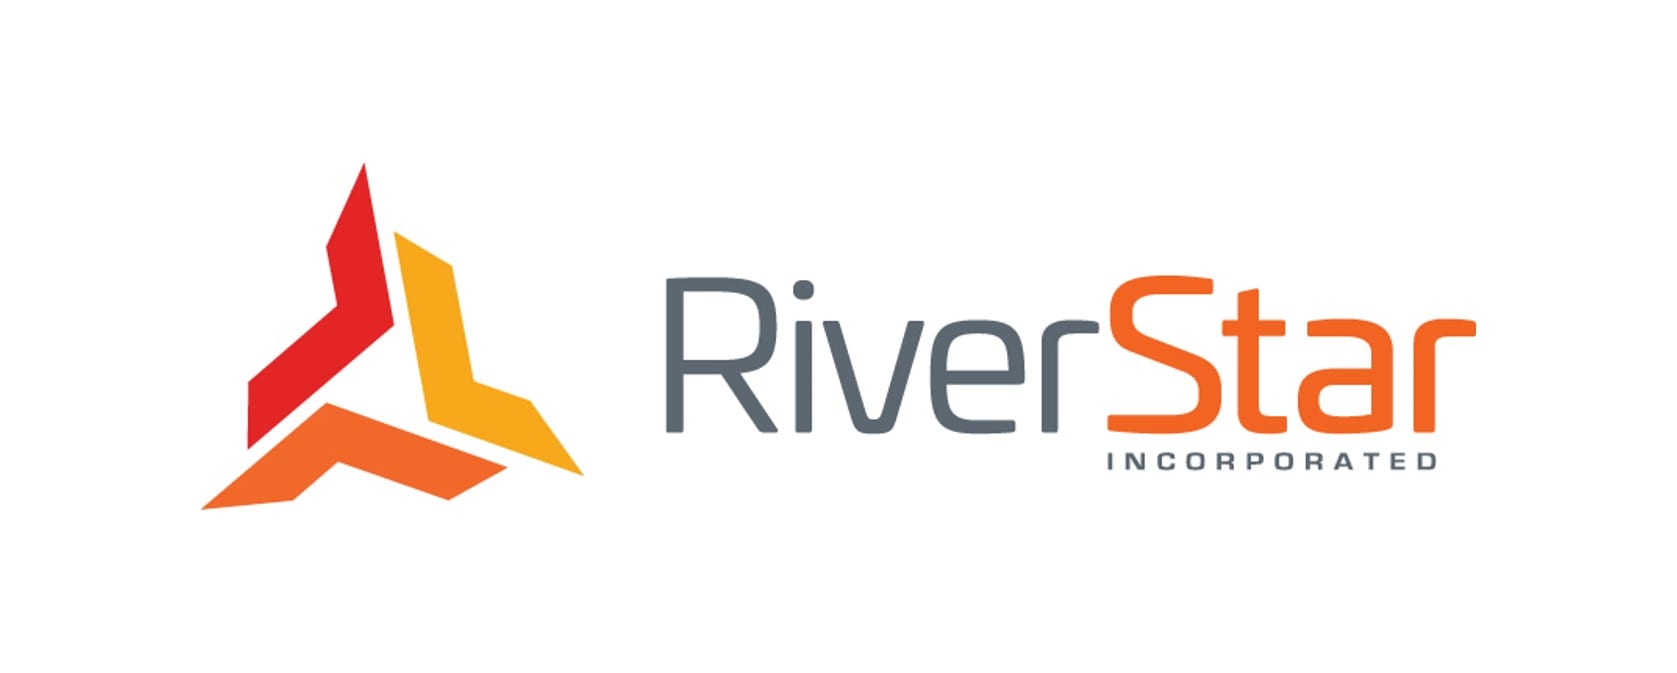 River Star Logo - Riverstar Contract Manufacturing. OEM & Brands Fulfillment Services